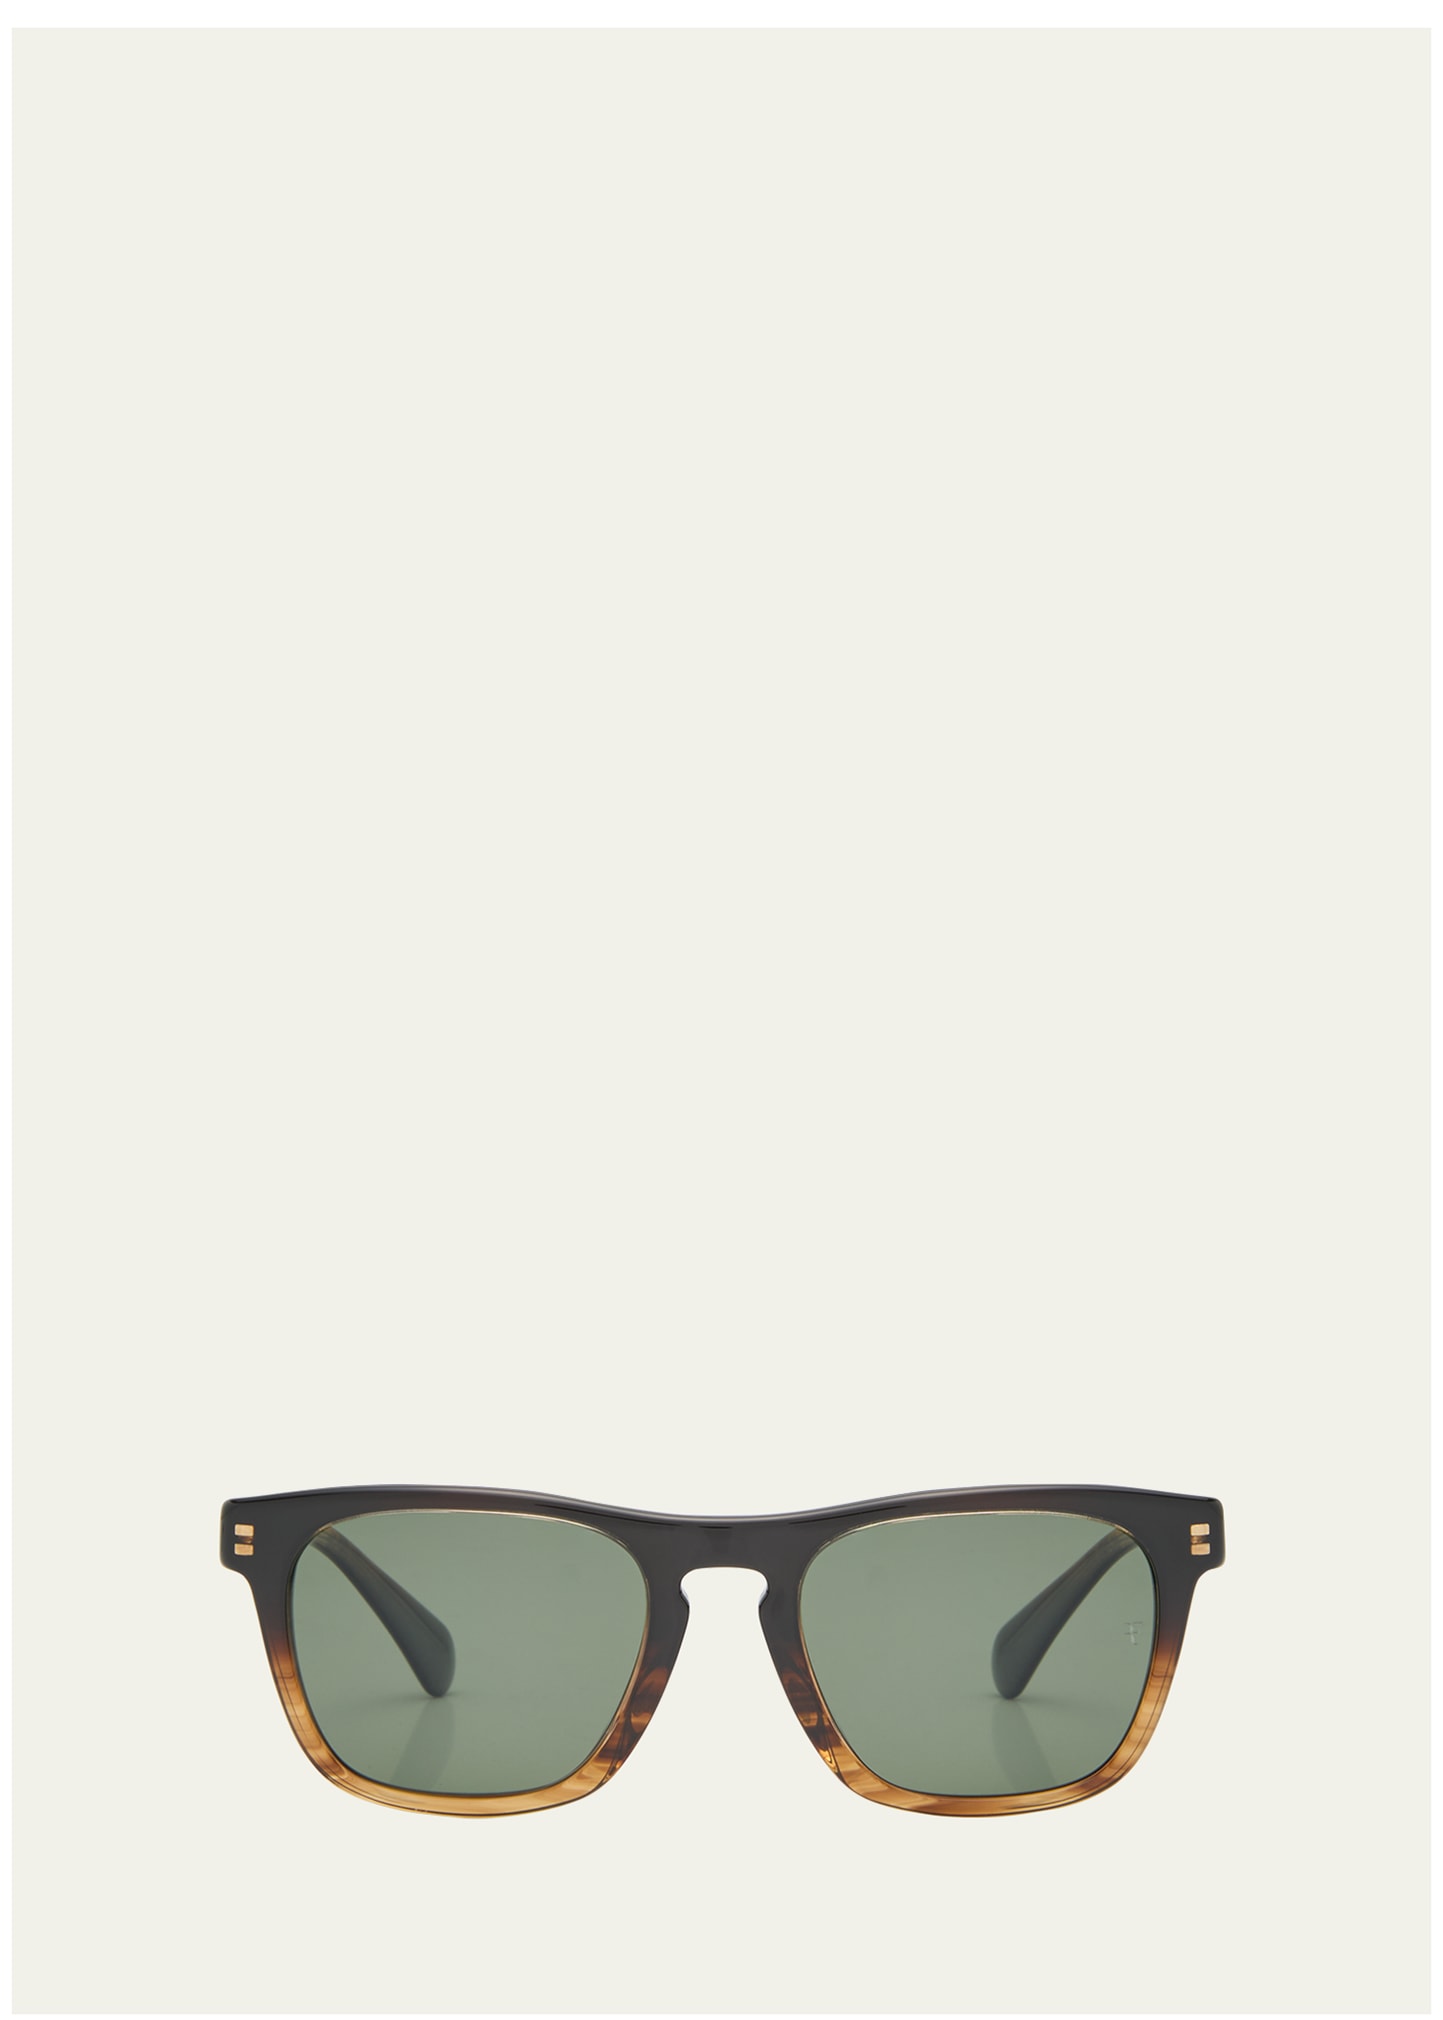 Oliver Peoples X Federer Men's R-3 Acetate Square Sunglasses In Green